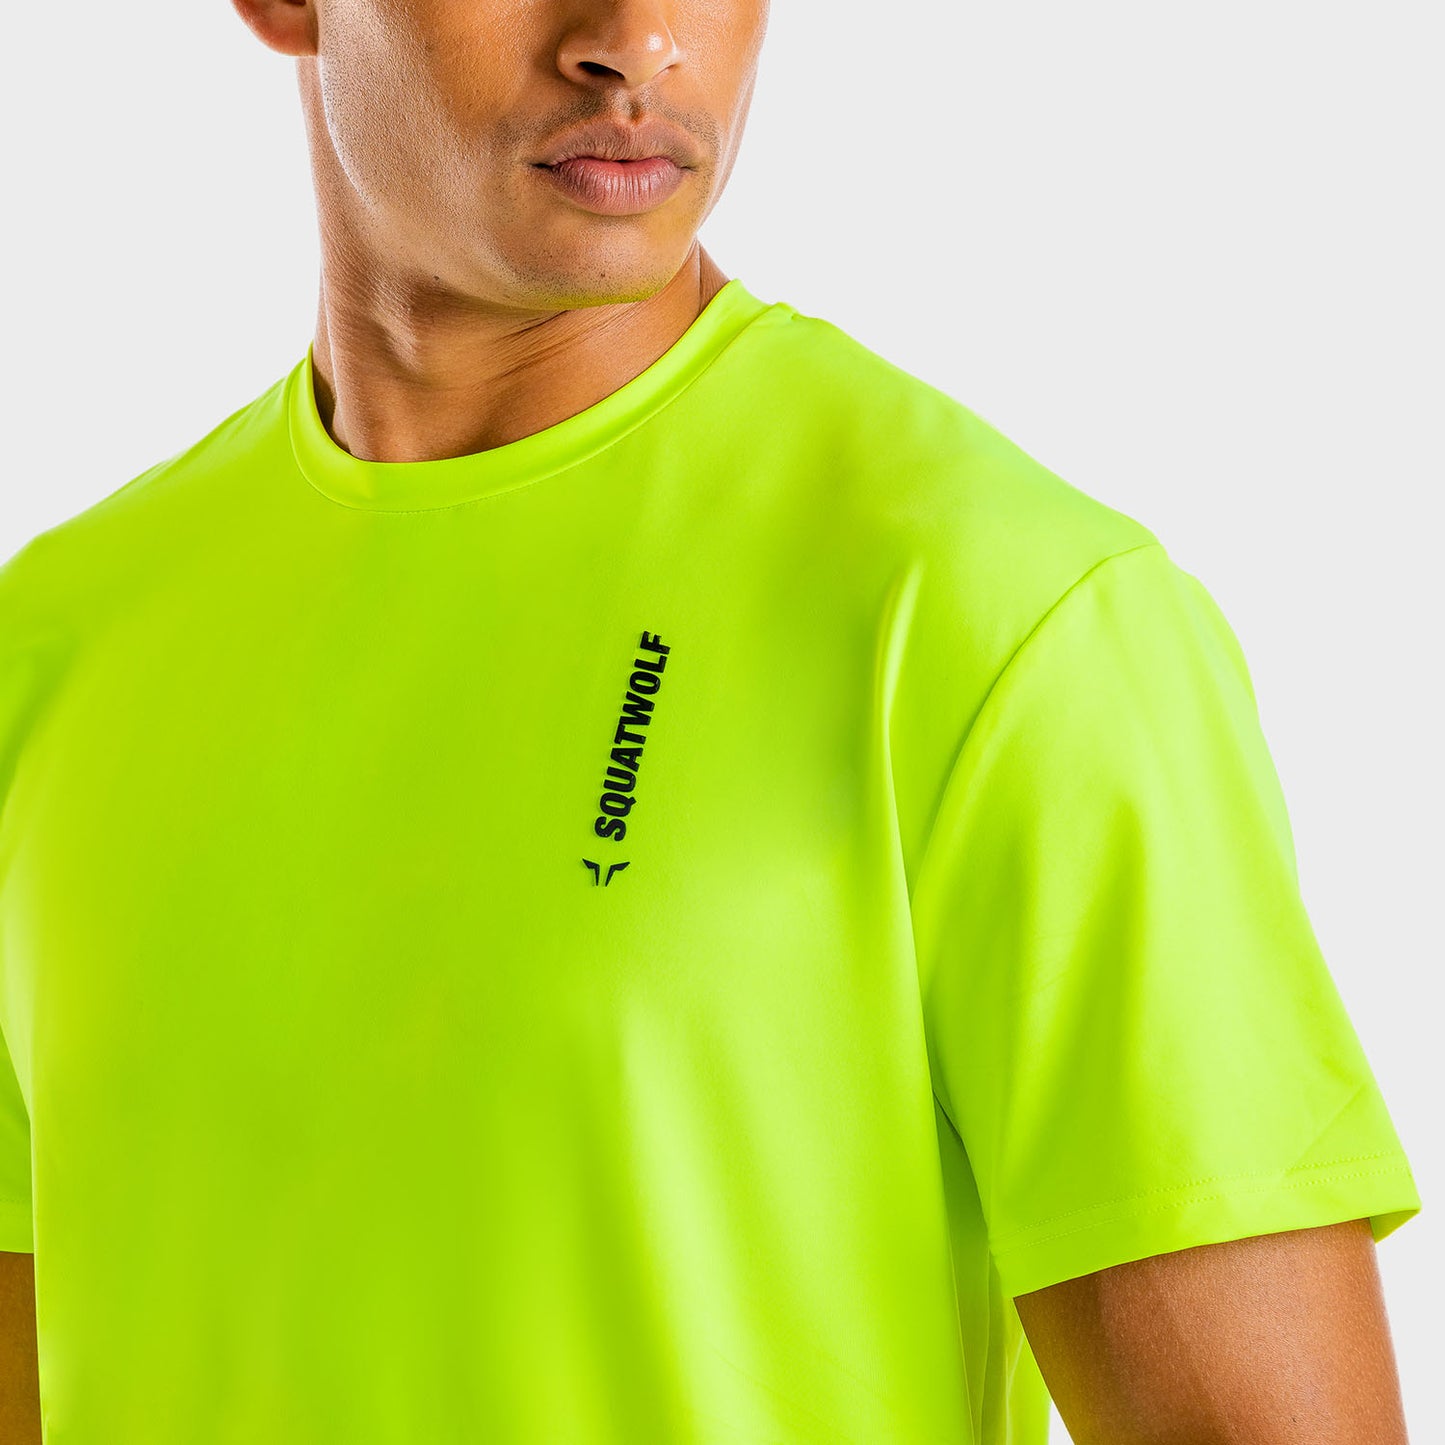 squatwolf-gym-wear-flux-tee-neon-workout-shirts-for-men